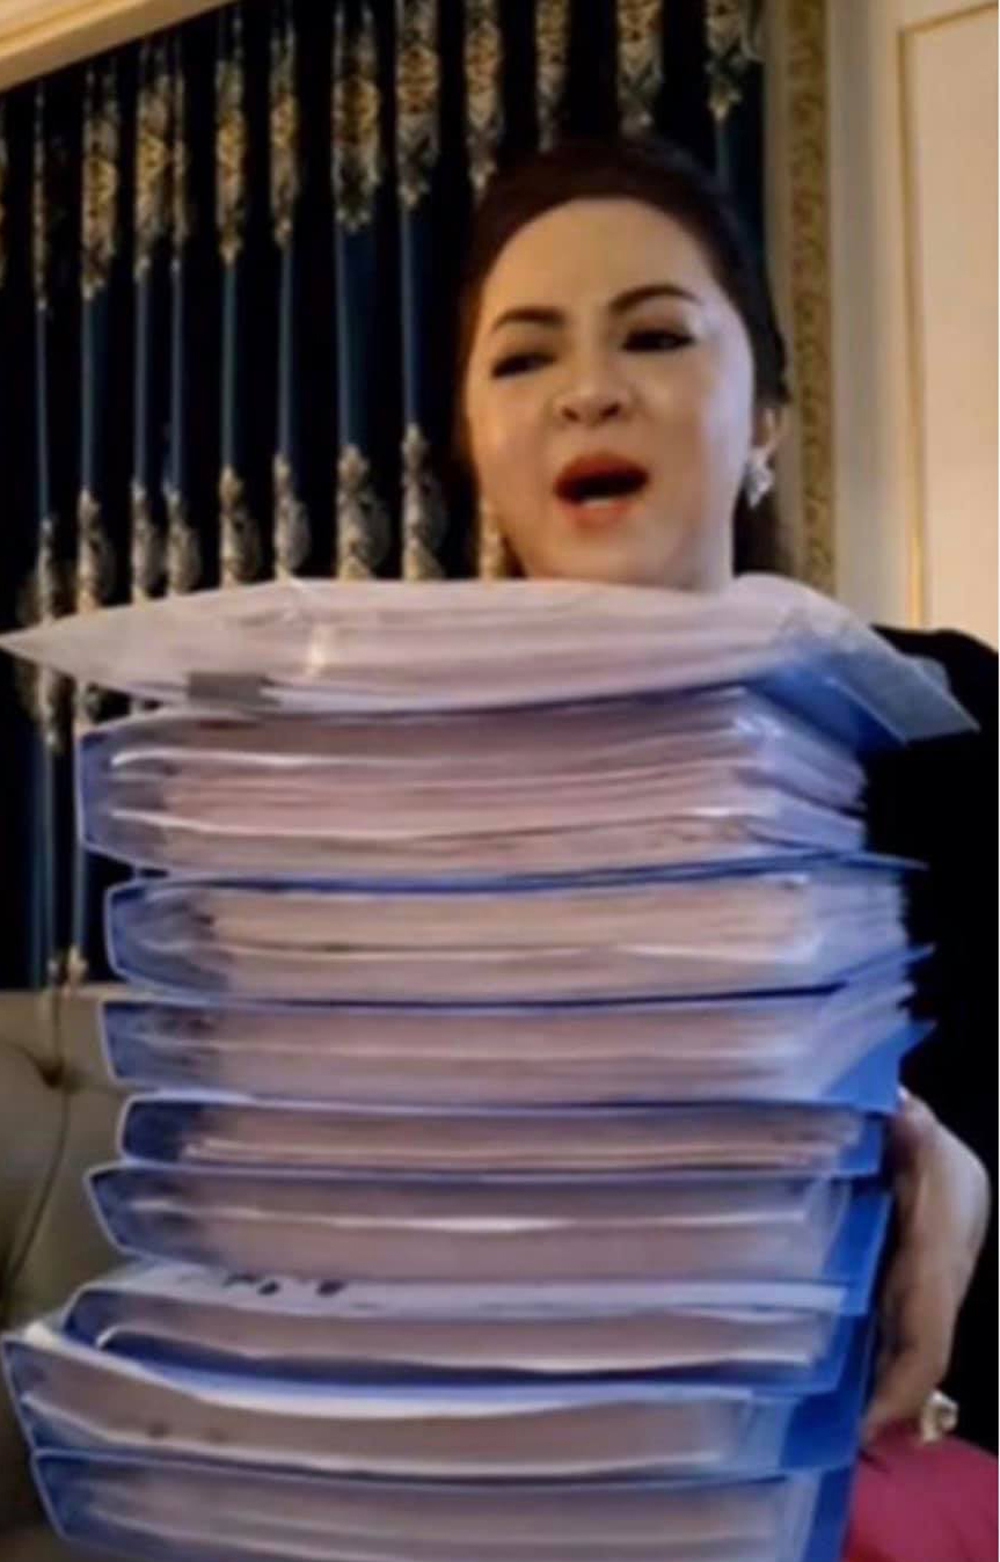 Before being arrested, Ms. Nguyen Phuong Hang used to show off a diamond in full plate, with a red book weighing in on it - Photo 7.